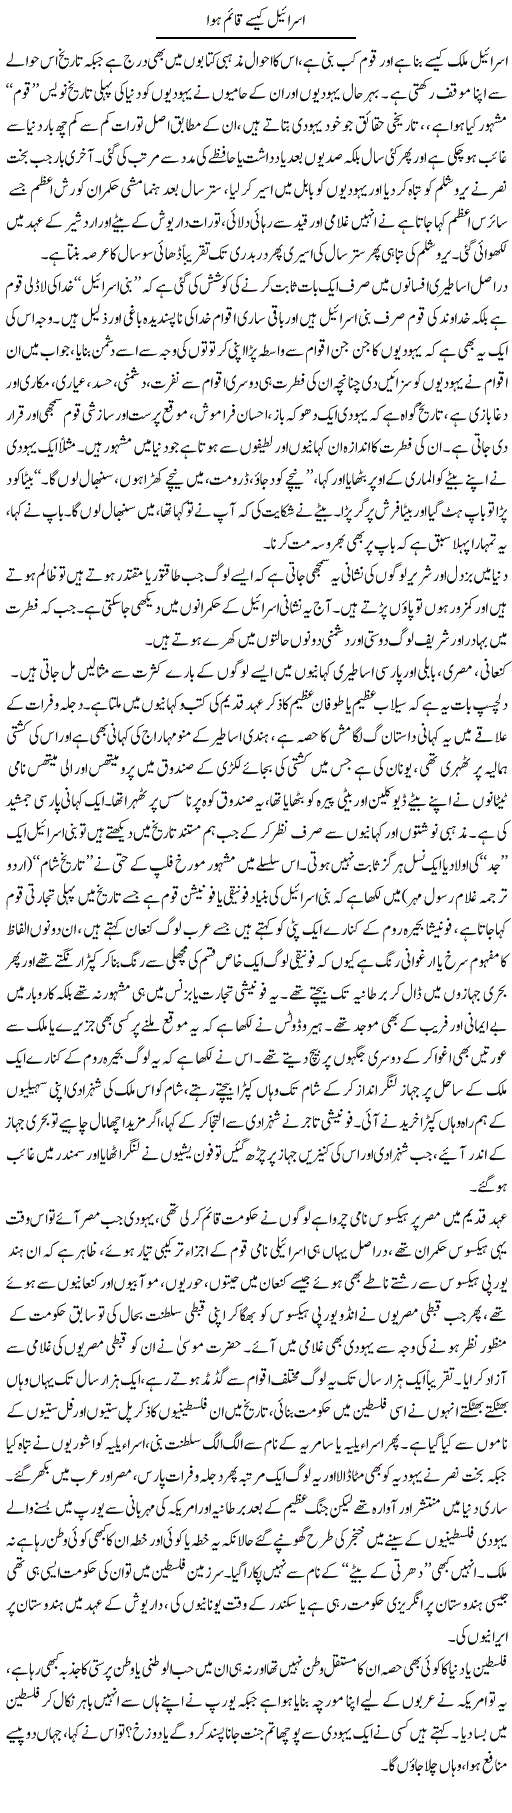 Saadullah Jan Barq Column About How Israel Came into Existence